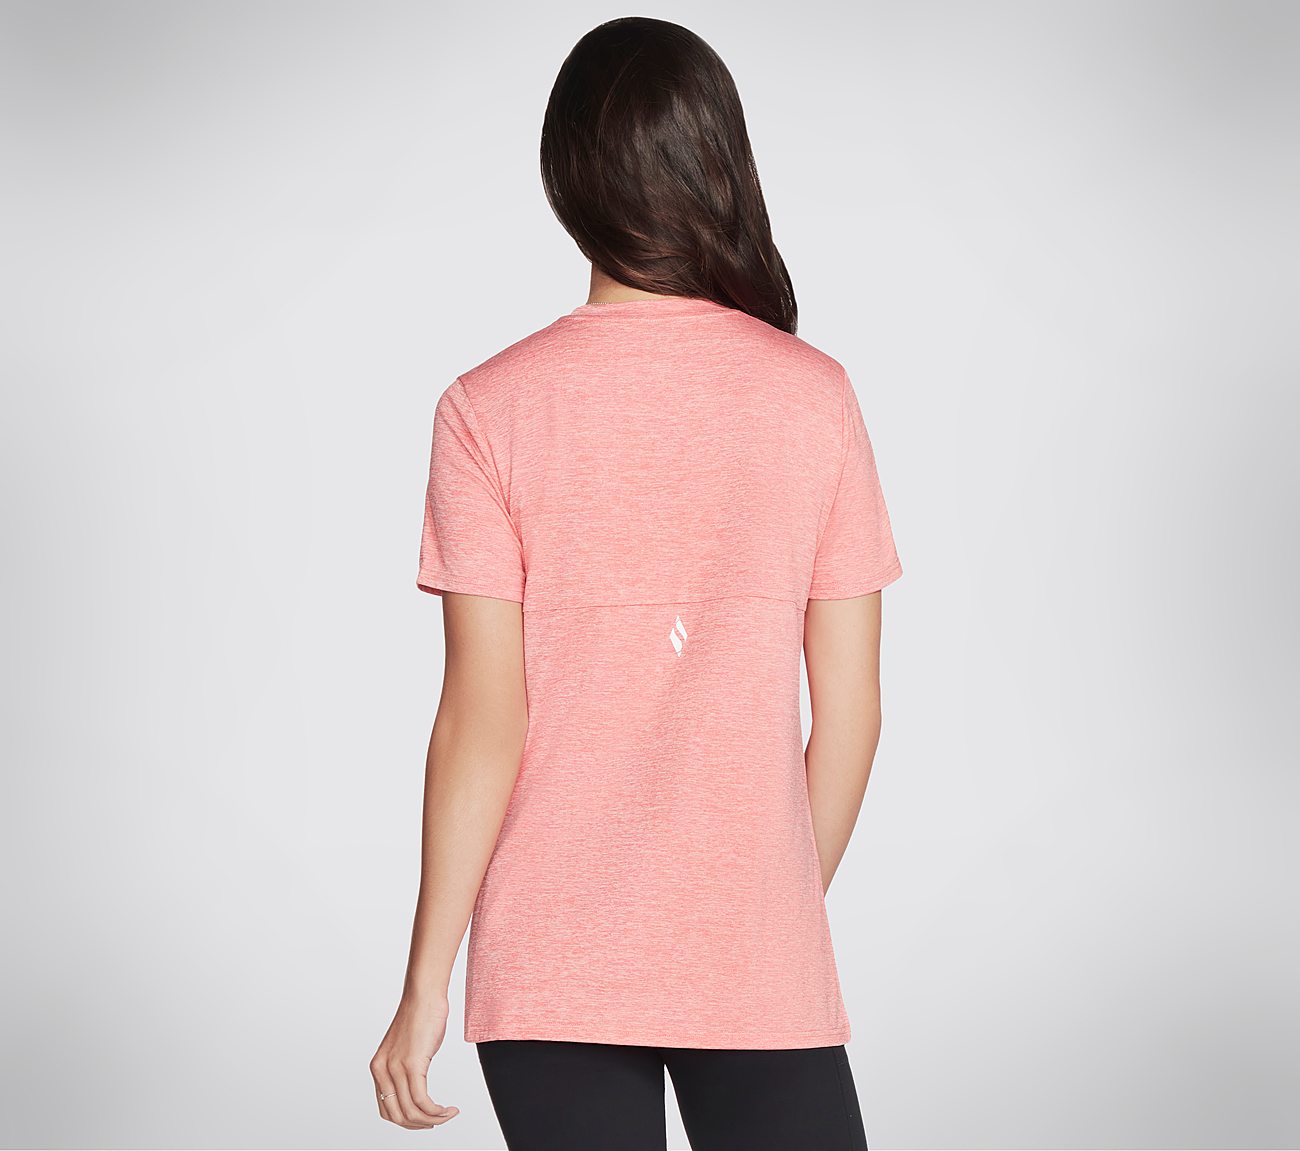 DIAMOND BLISSFUL TEE, CCORAL Apparel Top View